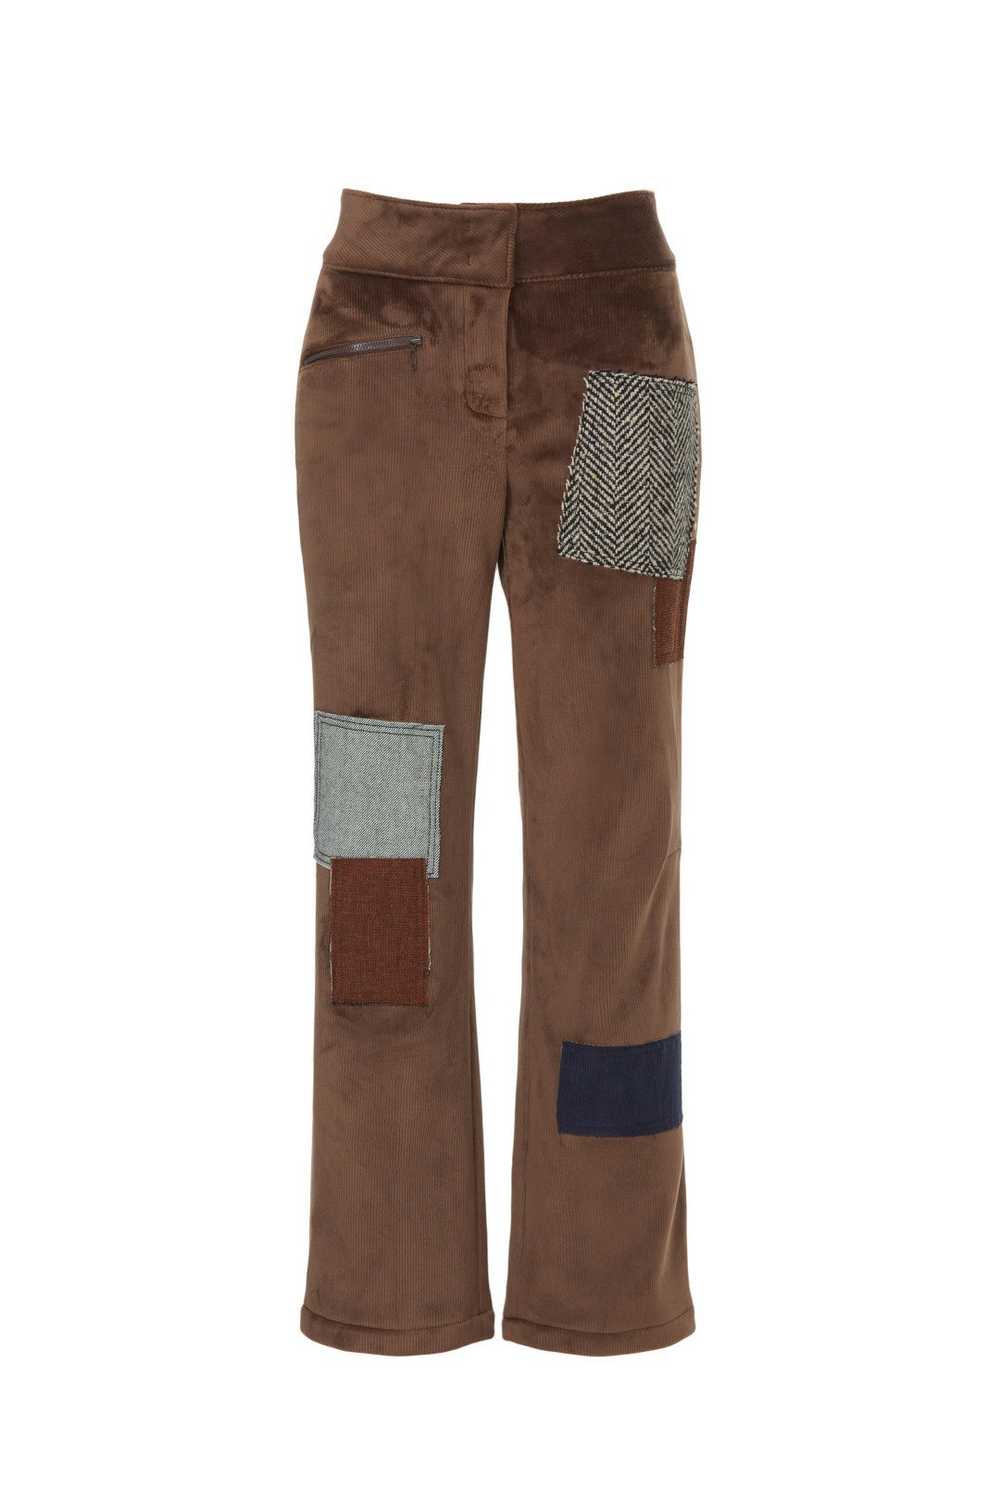 TheOpen Product Corduroy Patchwork Pants - image 5